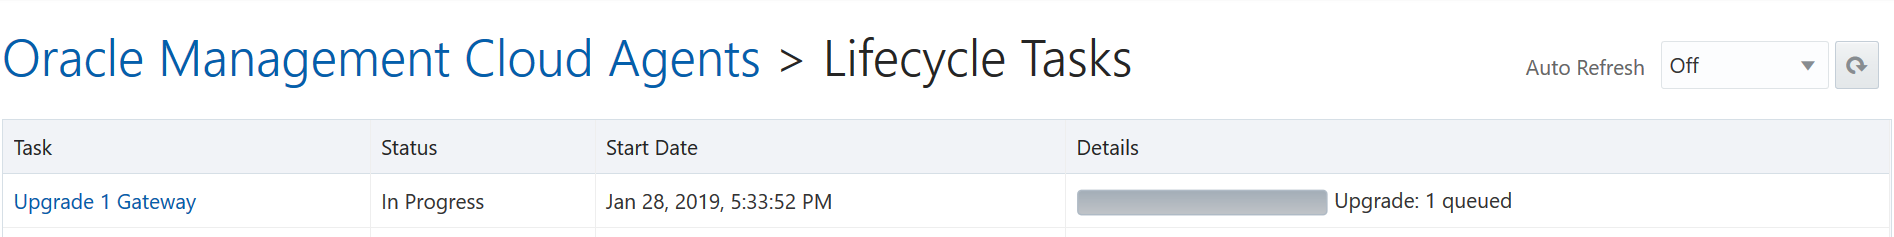 Lifecycle upgrade in progress